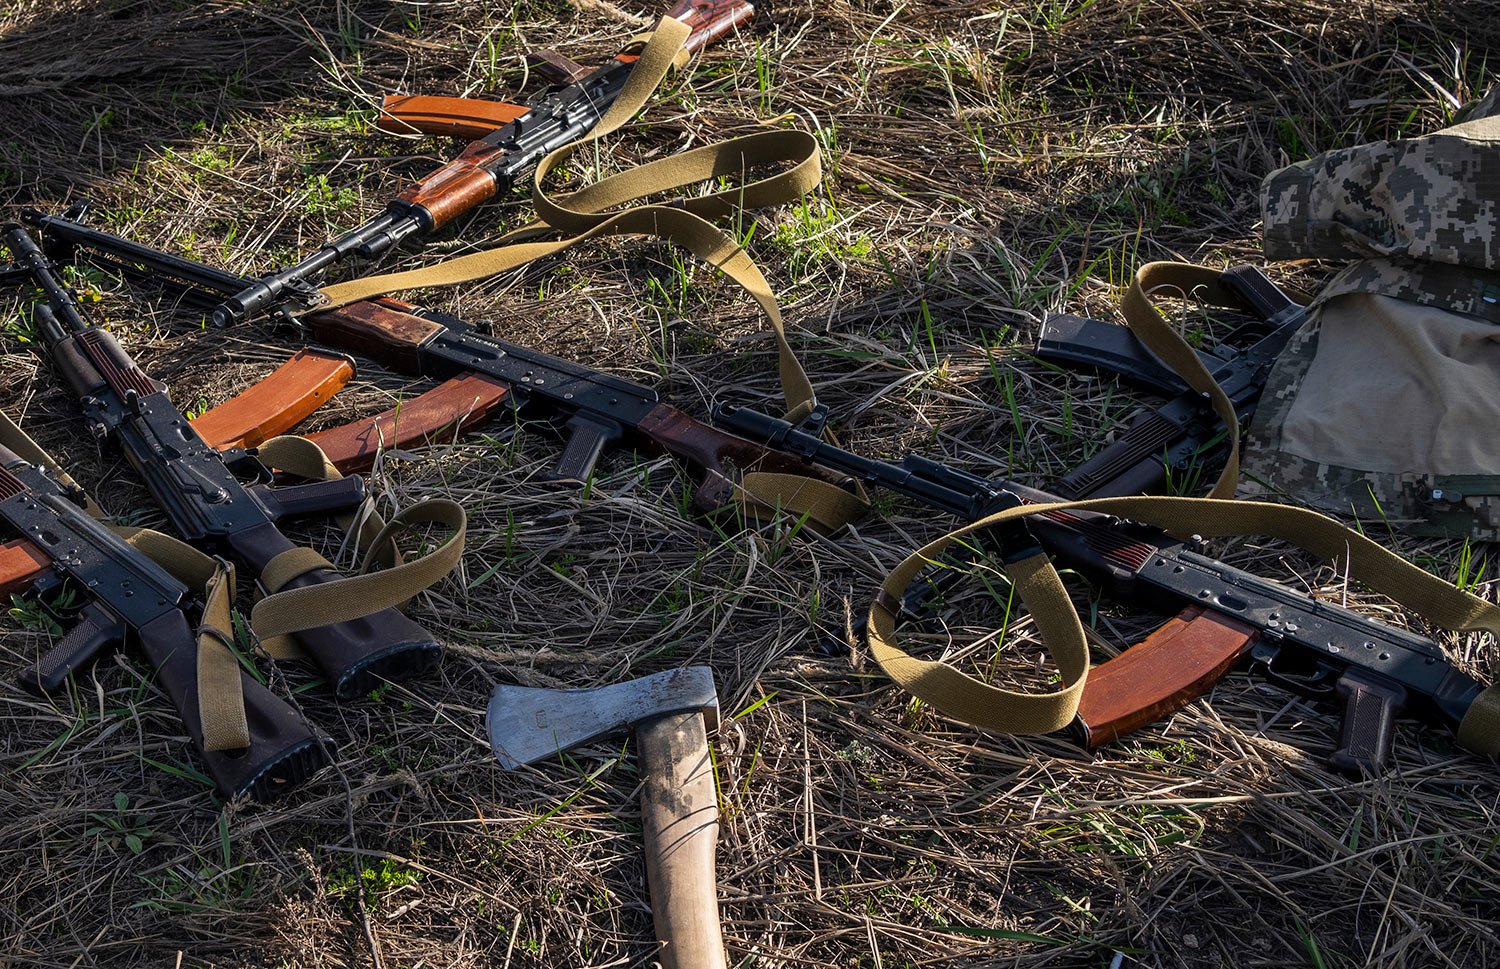  Rifles and an axe lay in a field where Ukrainian soldiers dig a trench in case of another Russian invasion, in Bucha, on the outskirts of Kyiv, Ukraine, Thursday April 14, 2022. (AP Photo/Rodrigo Abd) 